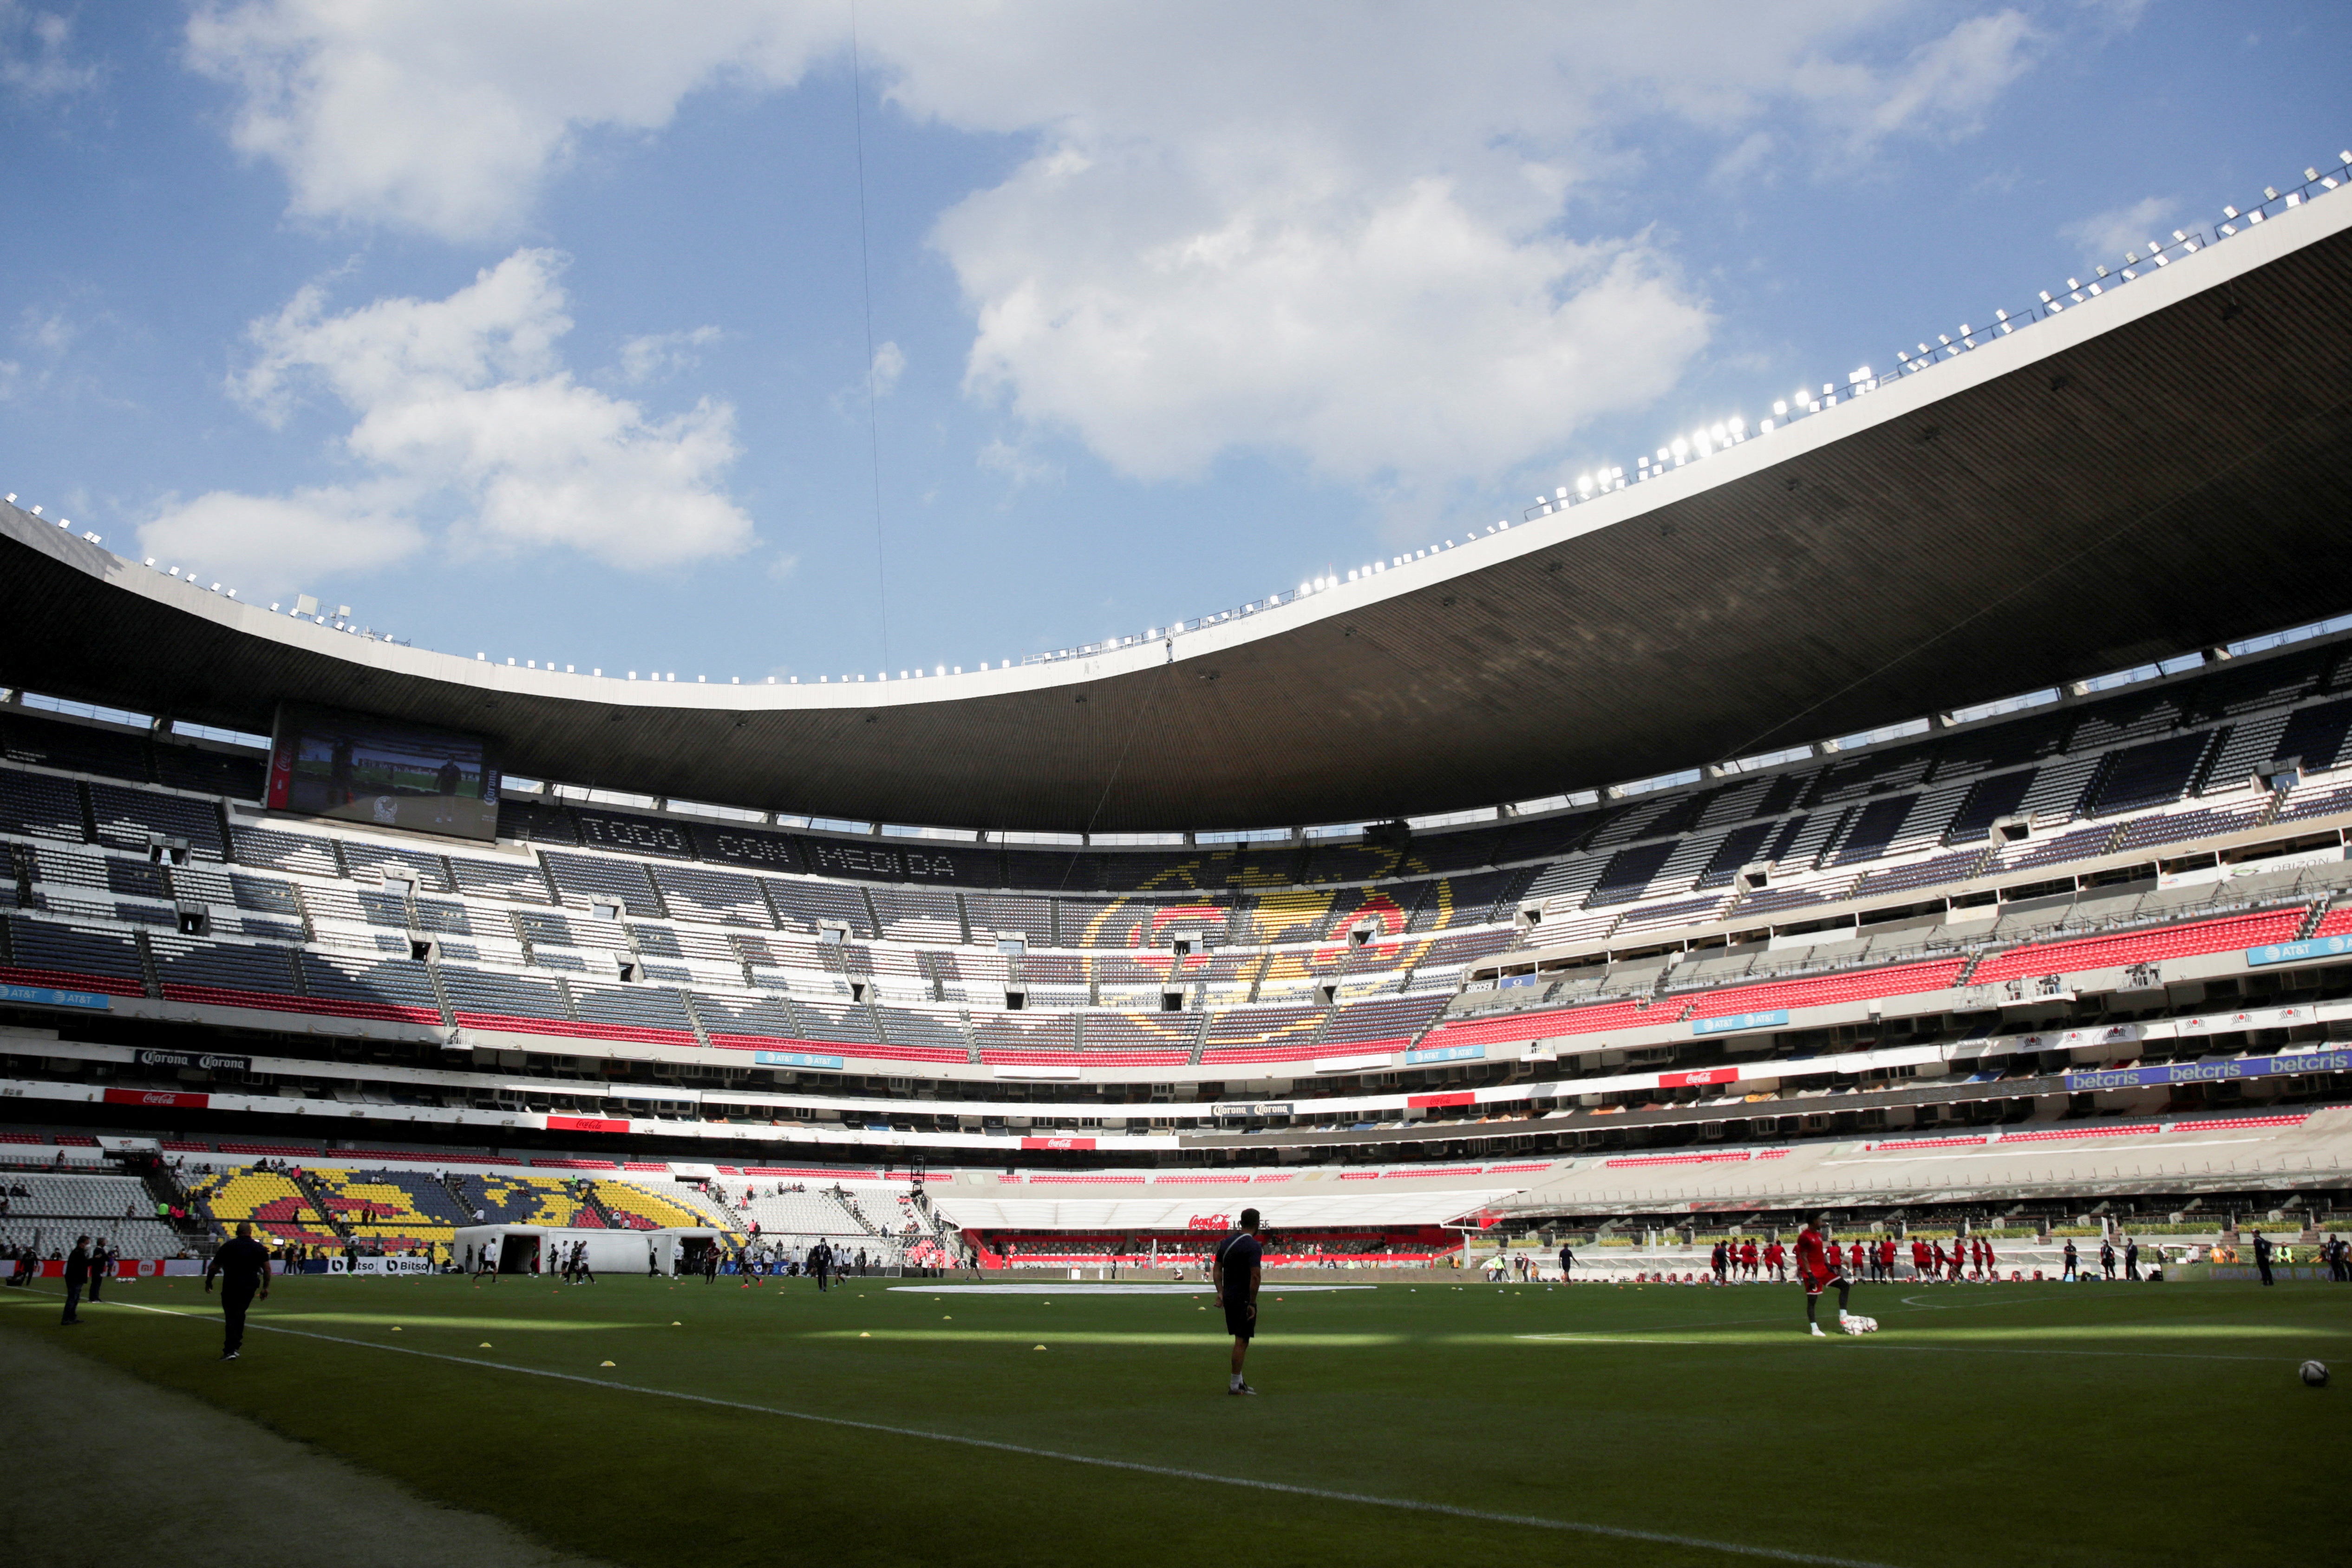 Estadio Azteca emerges as one of the main stadiums to host the Canelo Alvarez fight in the country (Reuters/Henry Romero)